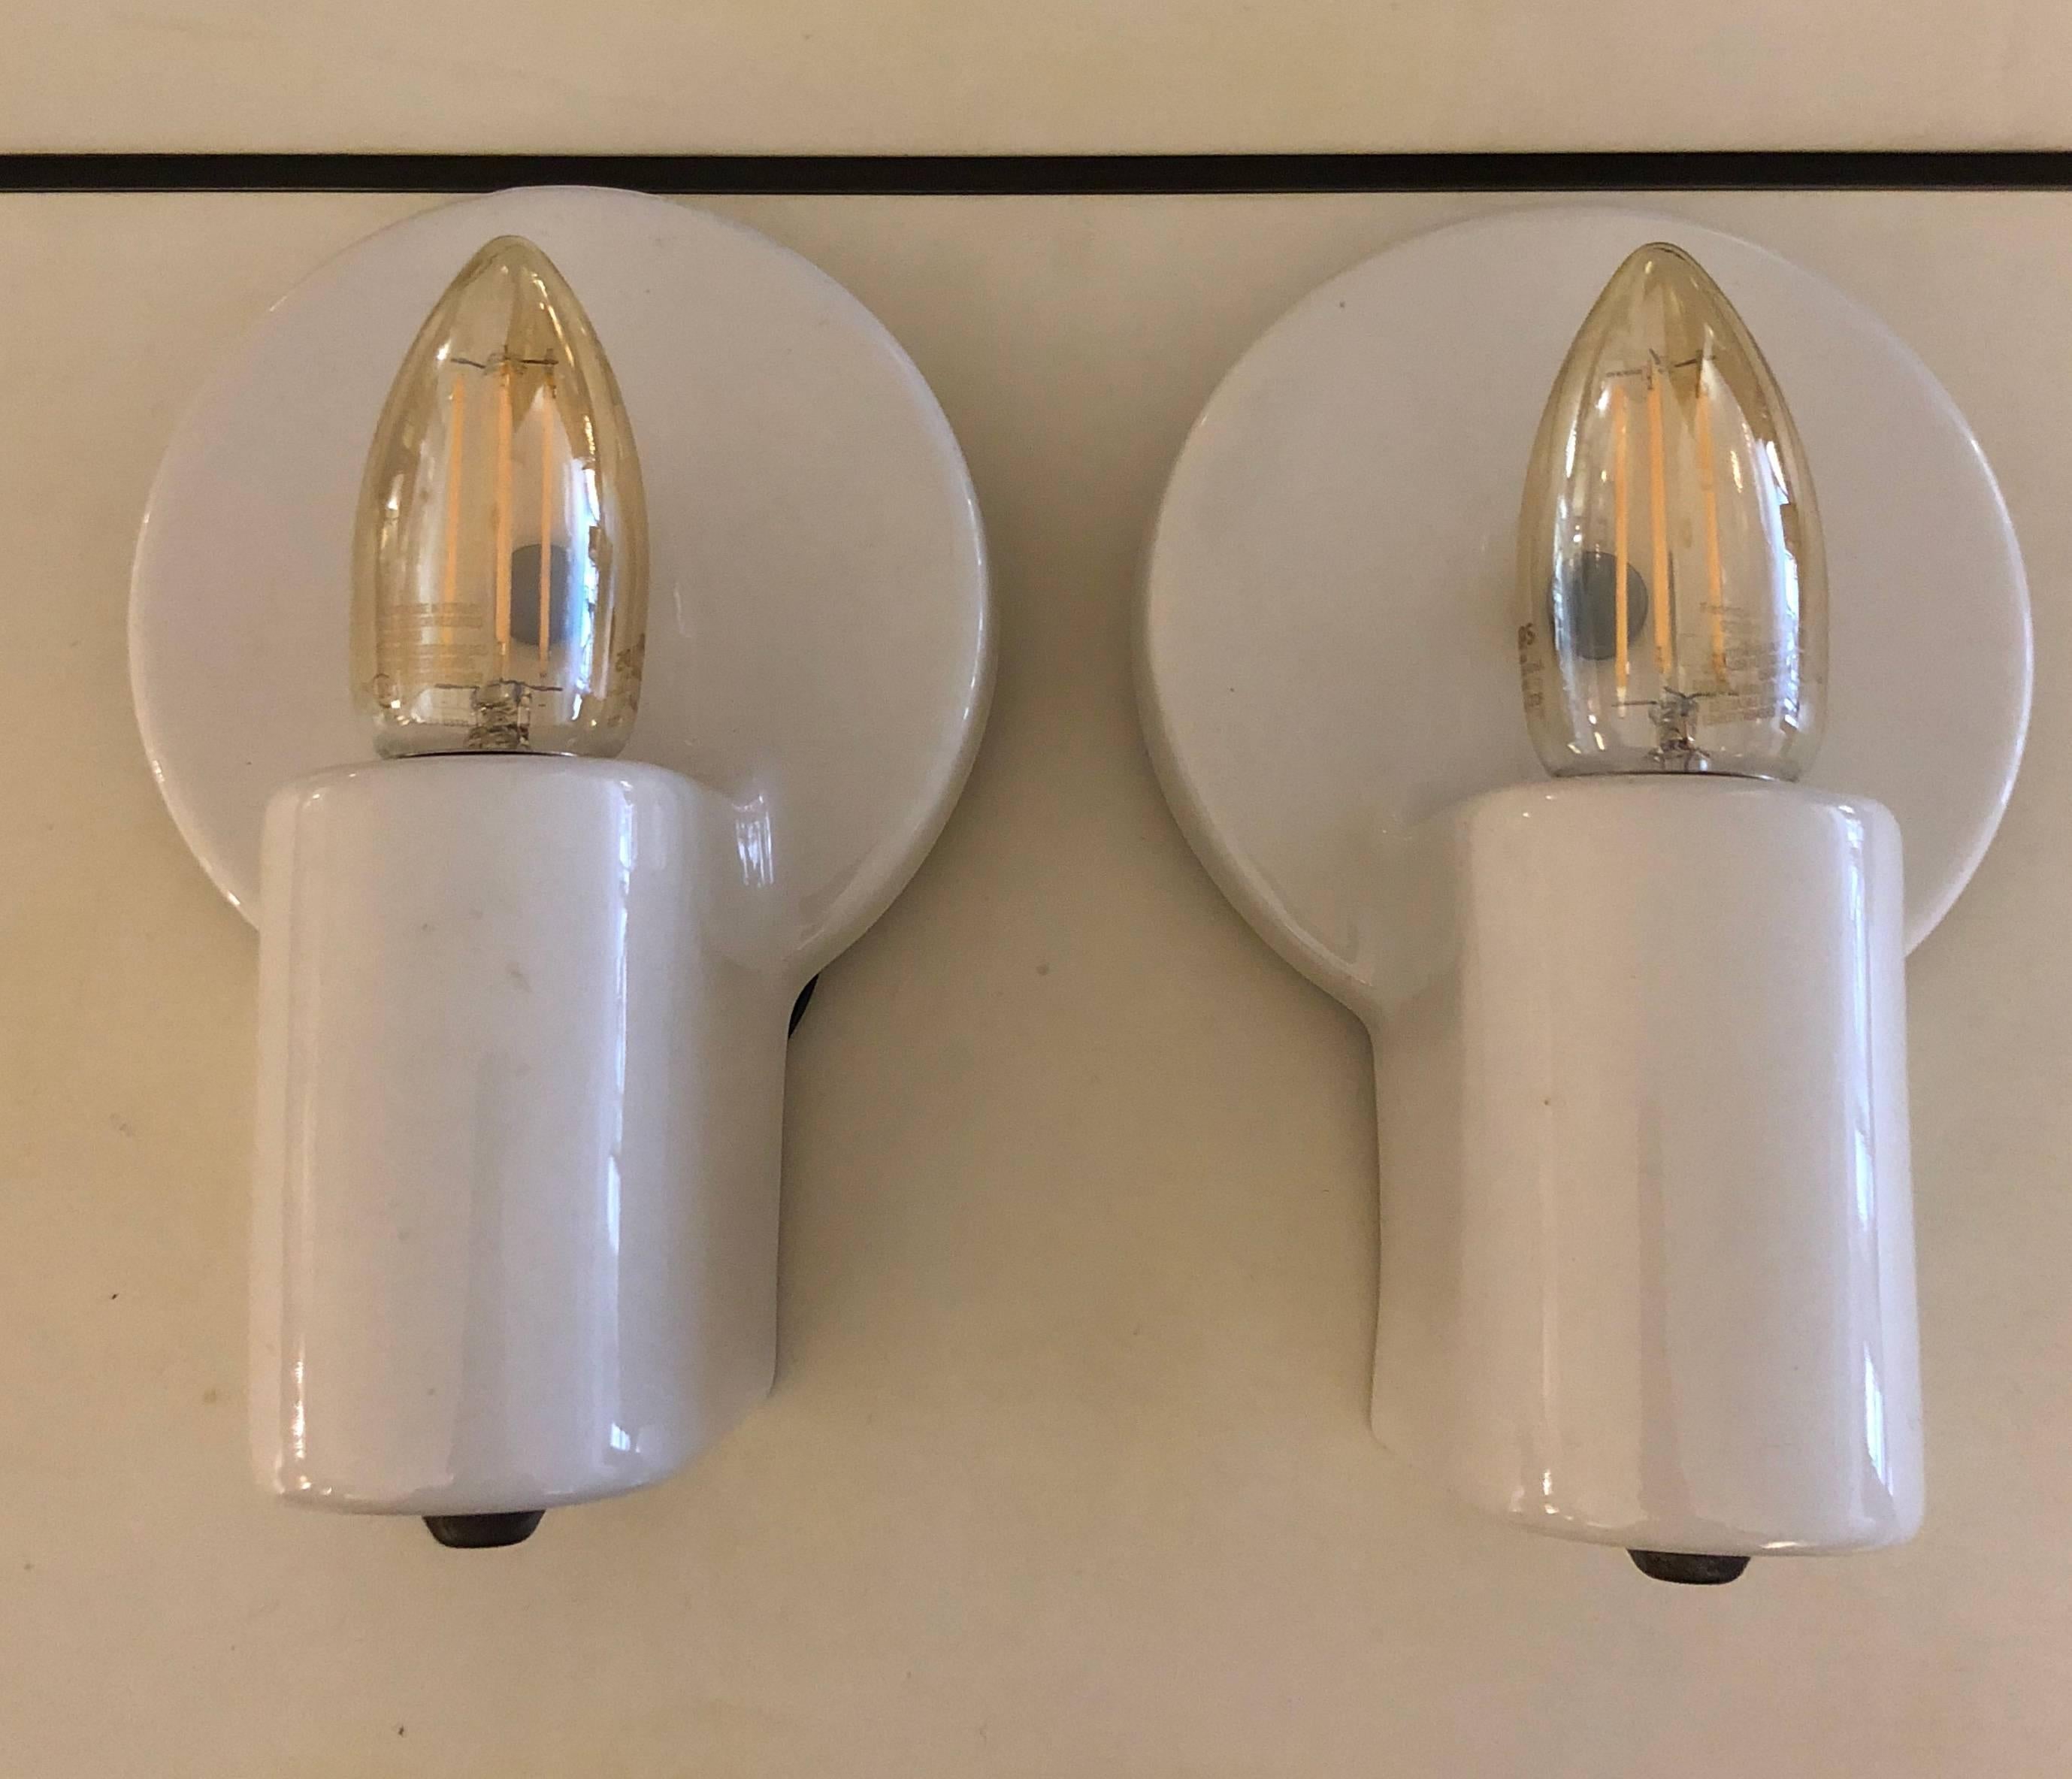 White porcelain wall lights designed by the great Swiss modernist architect. This pair is nicely minimalist, eschewing the usual pull chain, and embellished with the simplest brass tab hardware. For Pass & Seymour, USA, circa 1935